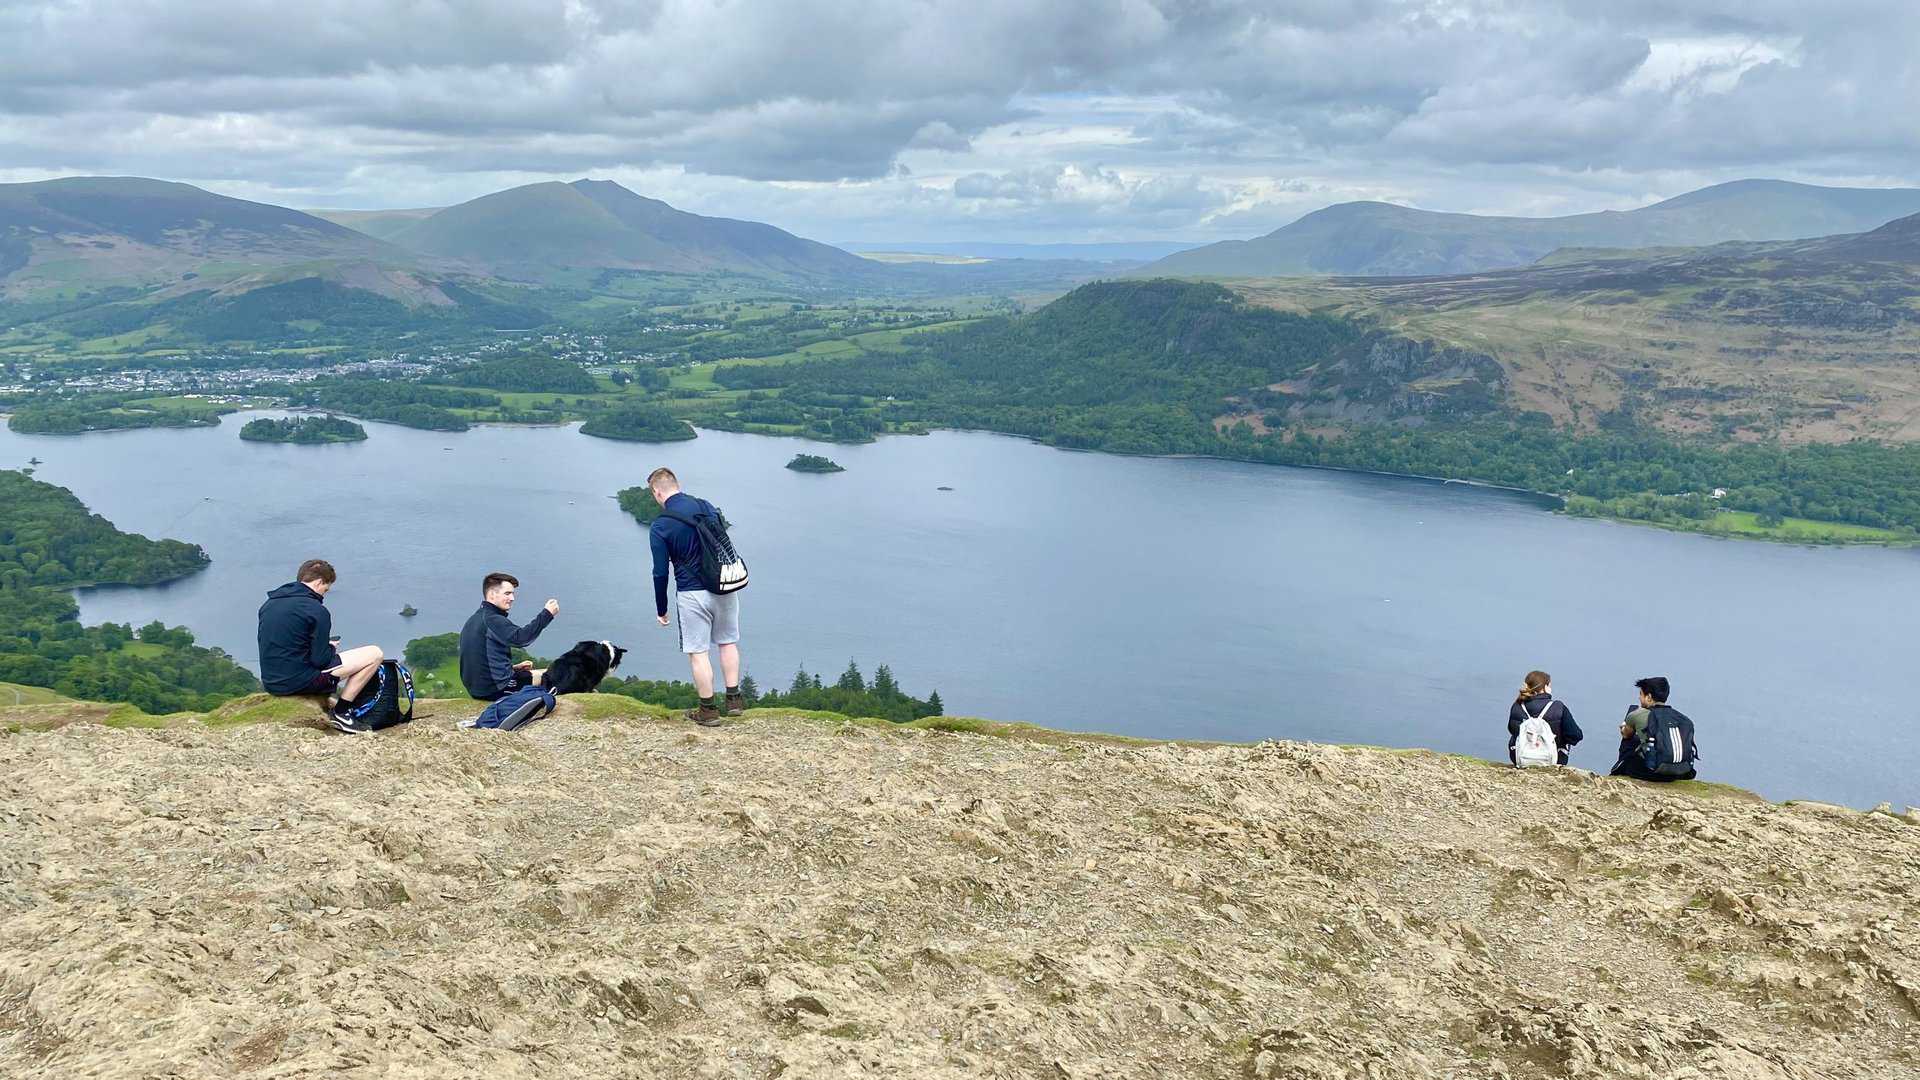 The summit of Cat Bells, height 451 metres (1480 feet).